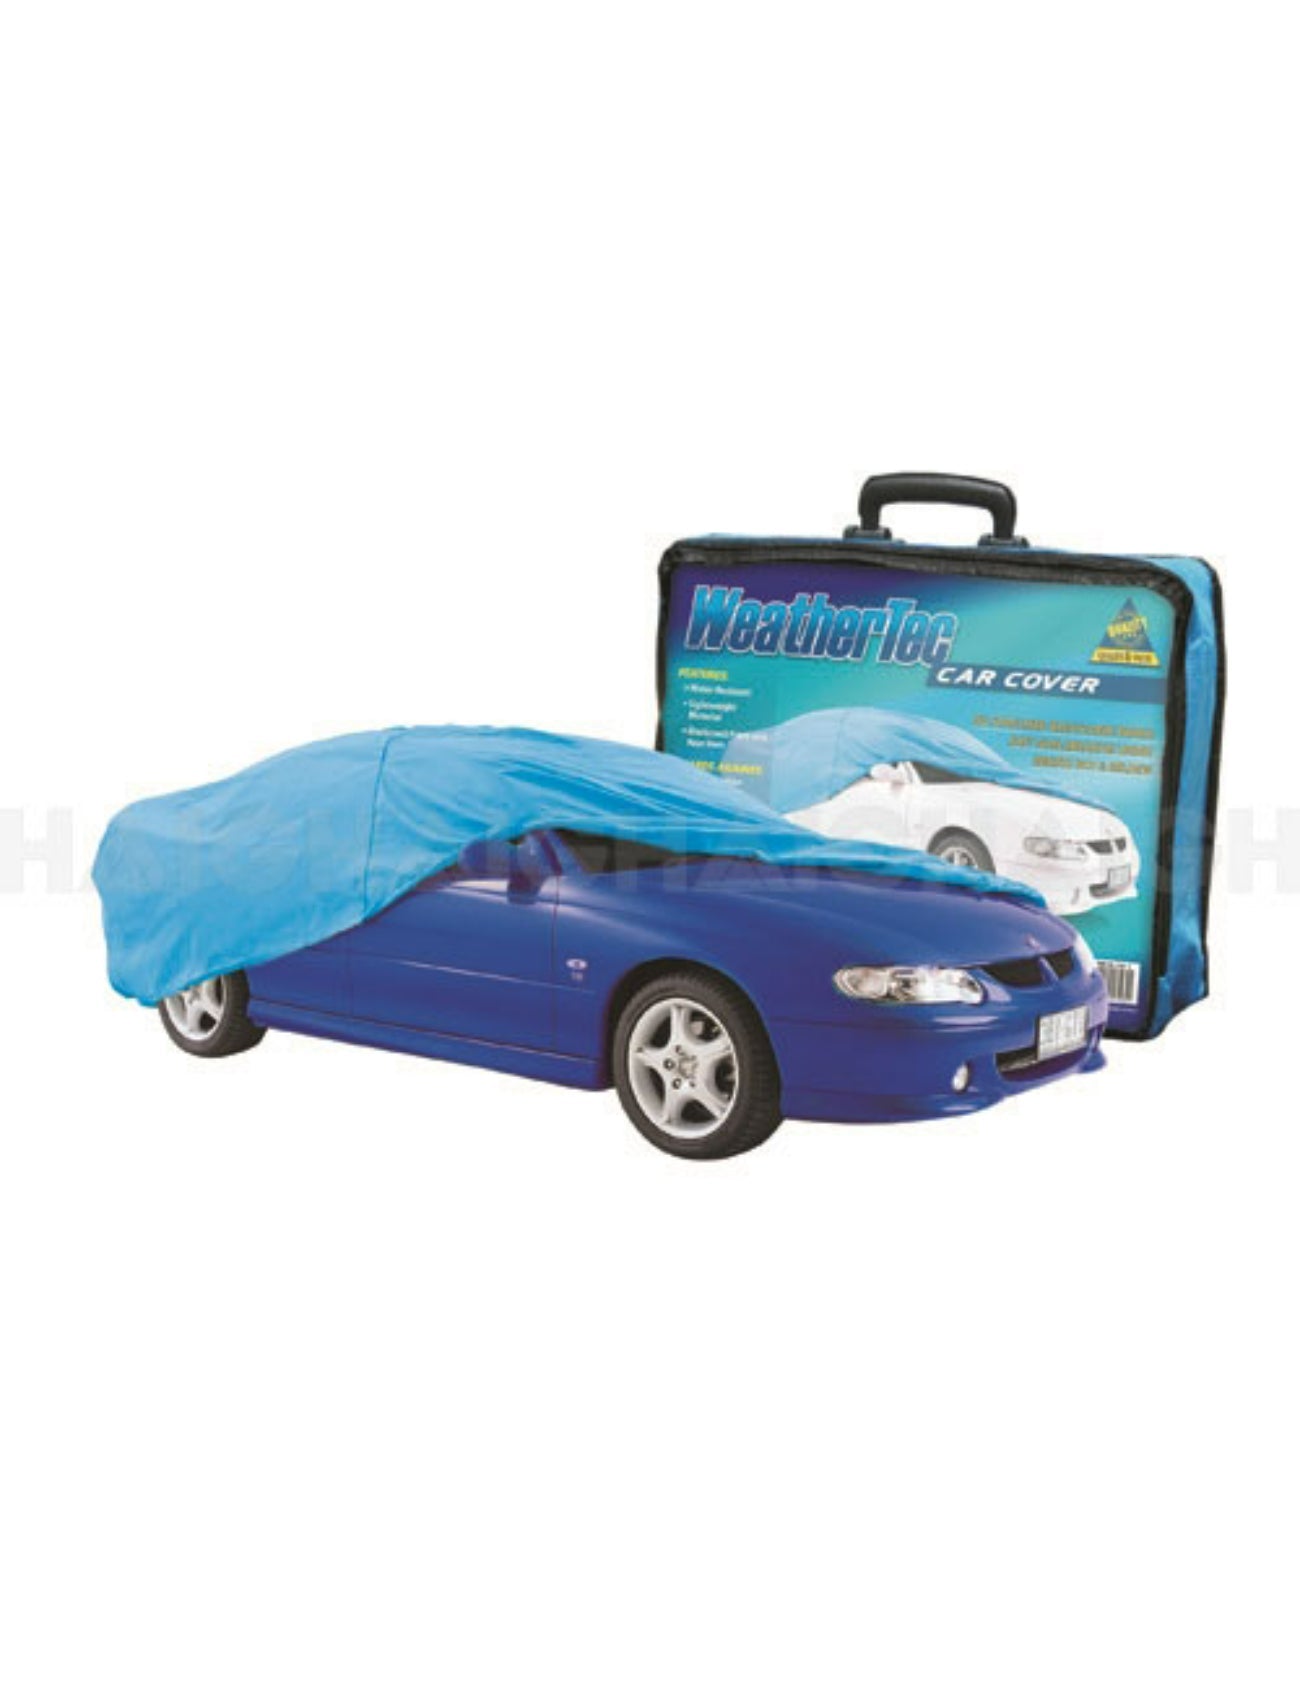 CAR COVER WEATHERTEC LARGE